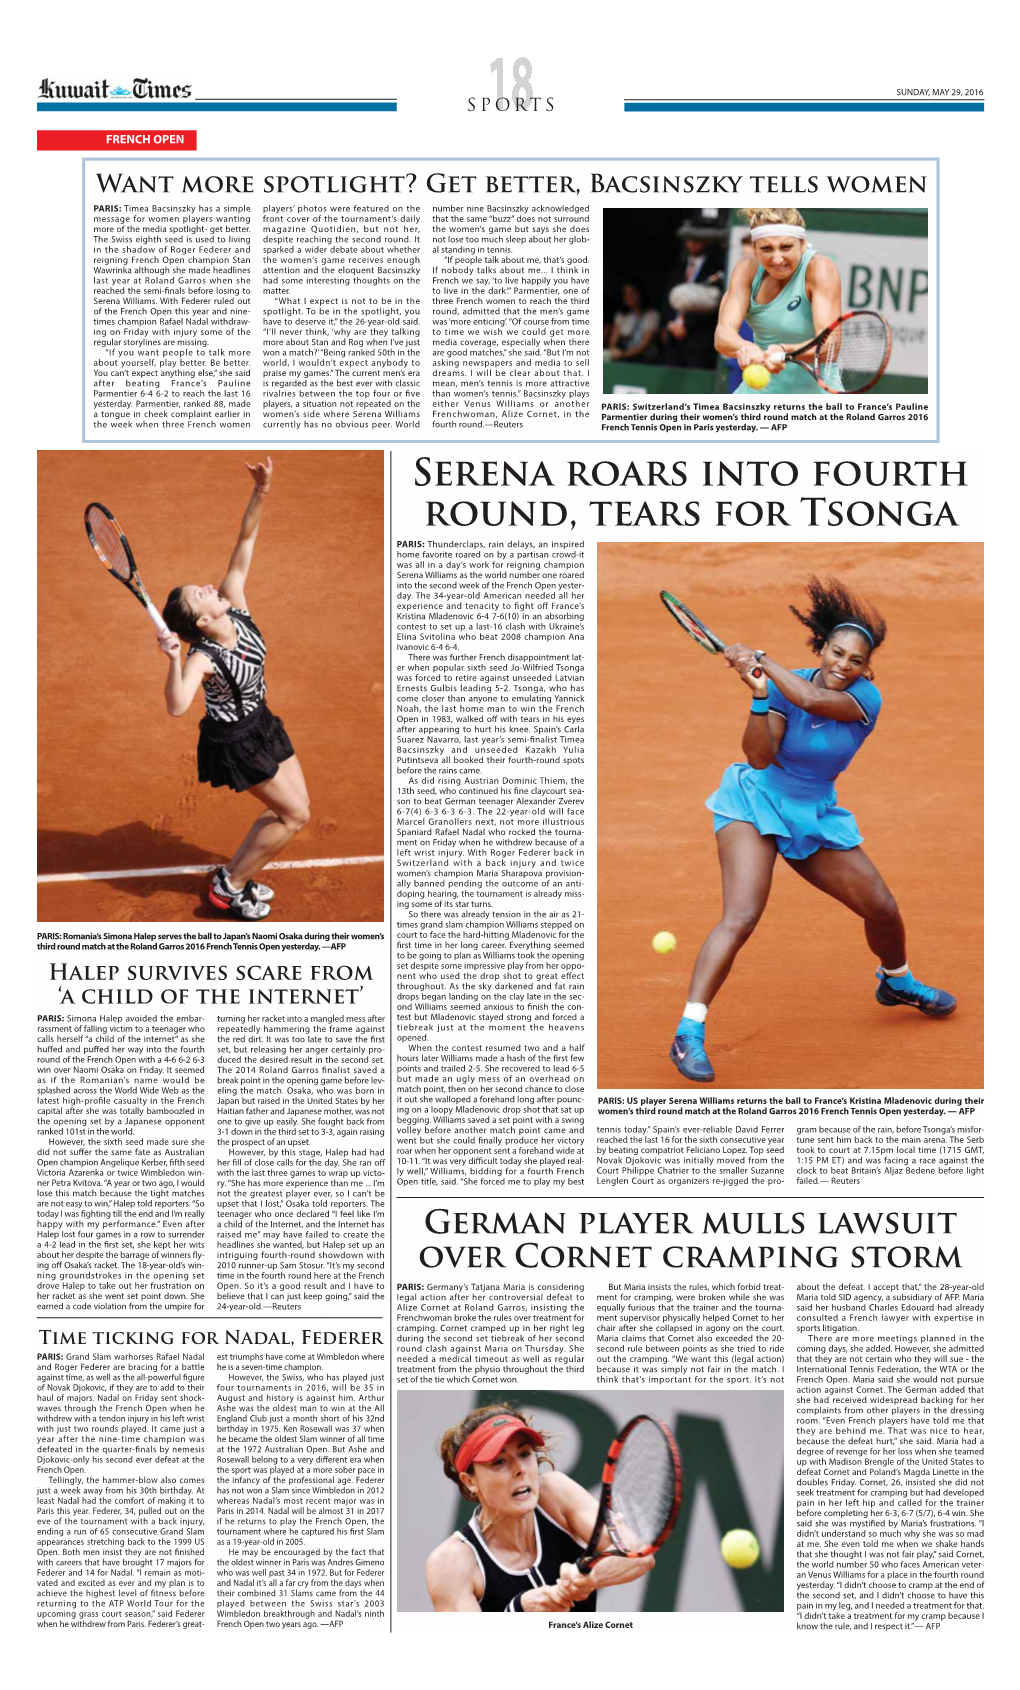 Serena Roars Into Fourth Round, Tears for Tsonga